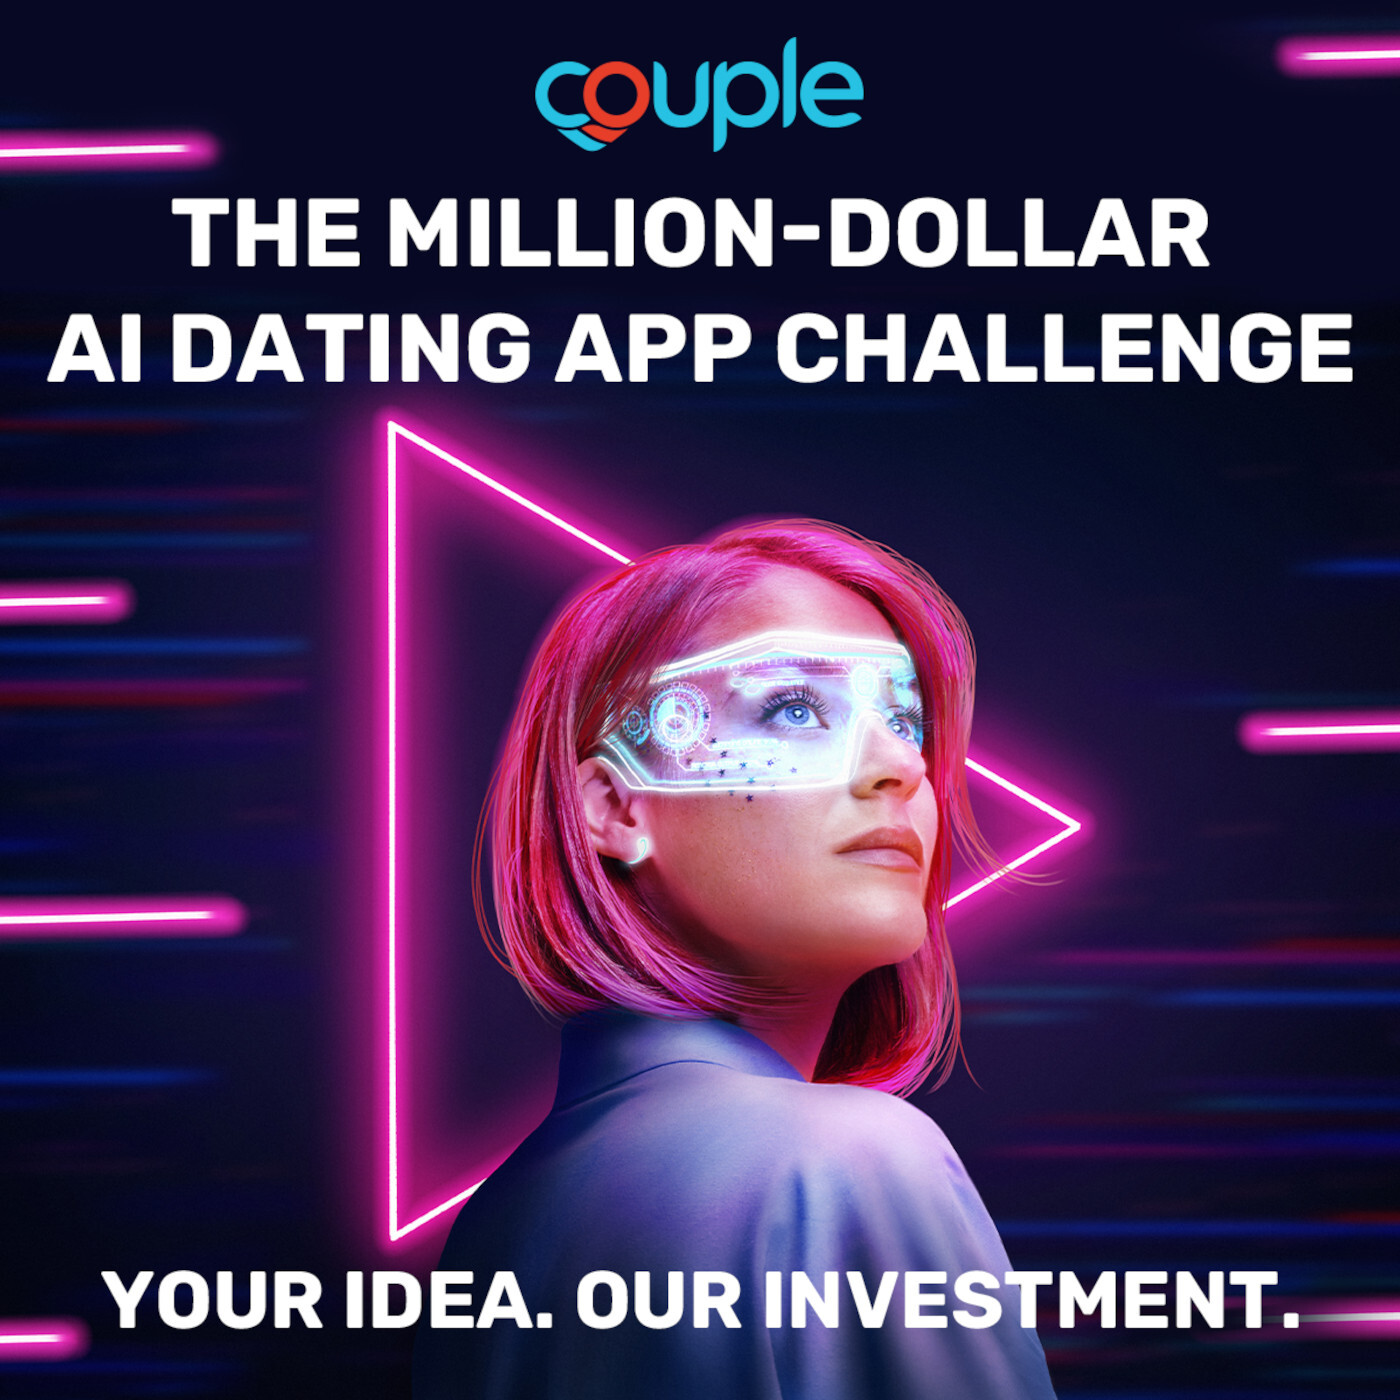 Graphic displaying futuristic woman with pink hair and wearing digital VR glasses. Text reads "Couple's The Million-Dollar AI Dating App Challenge. Your idea. Our investment."